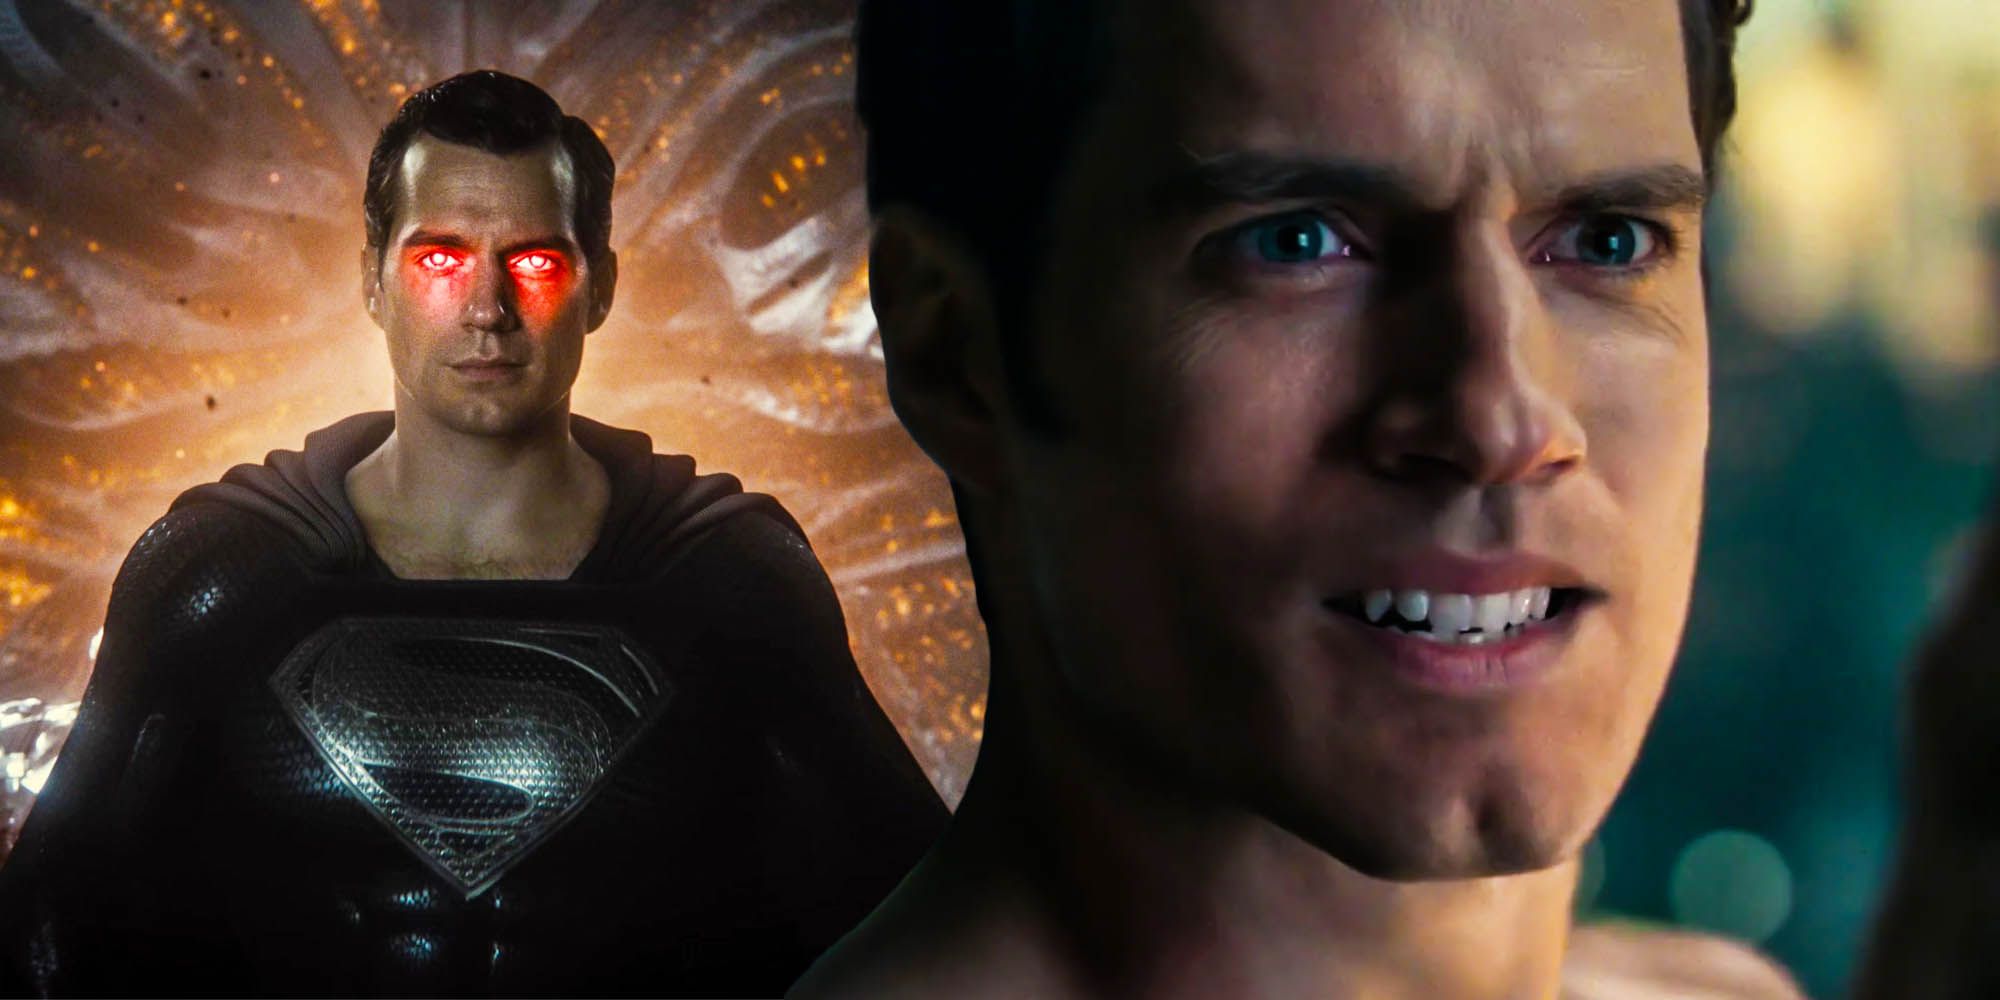 Justice league the snyder cut cgi is opposite of 2017 the justice league